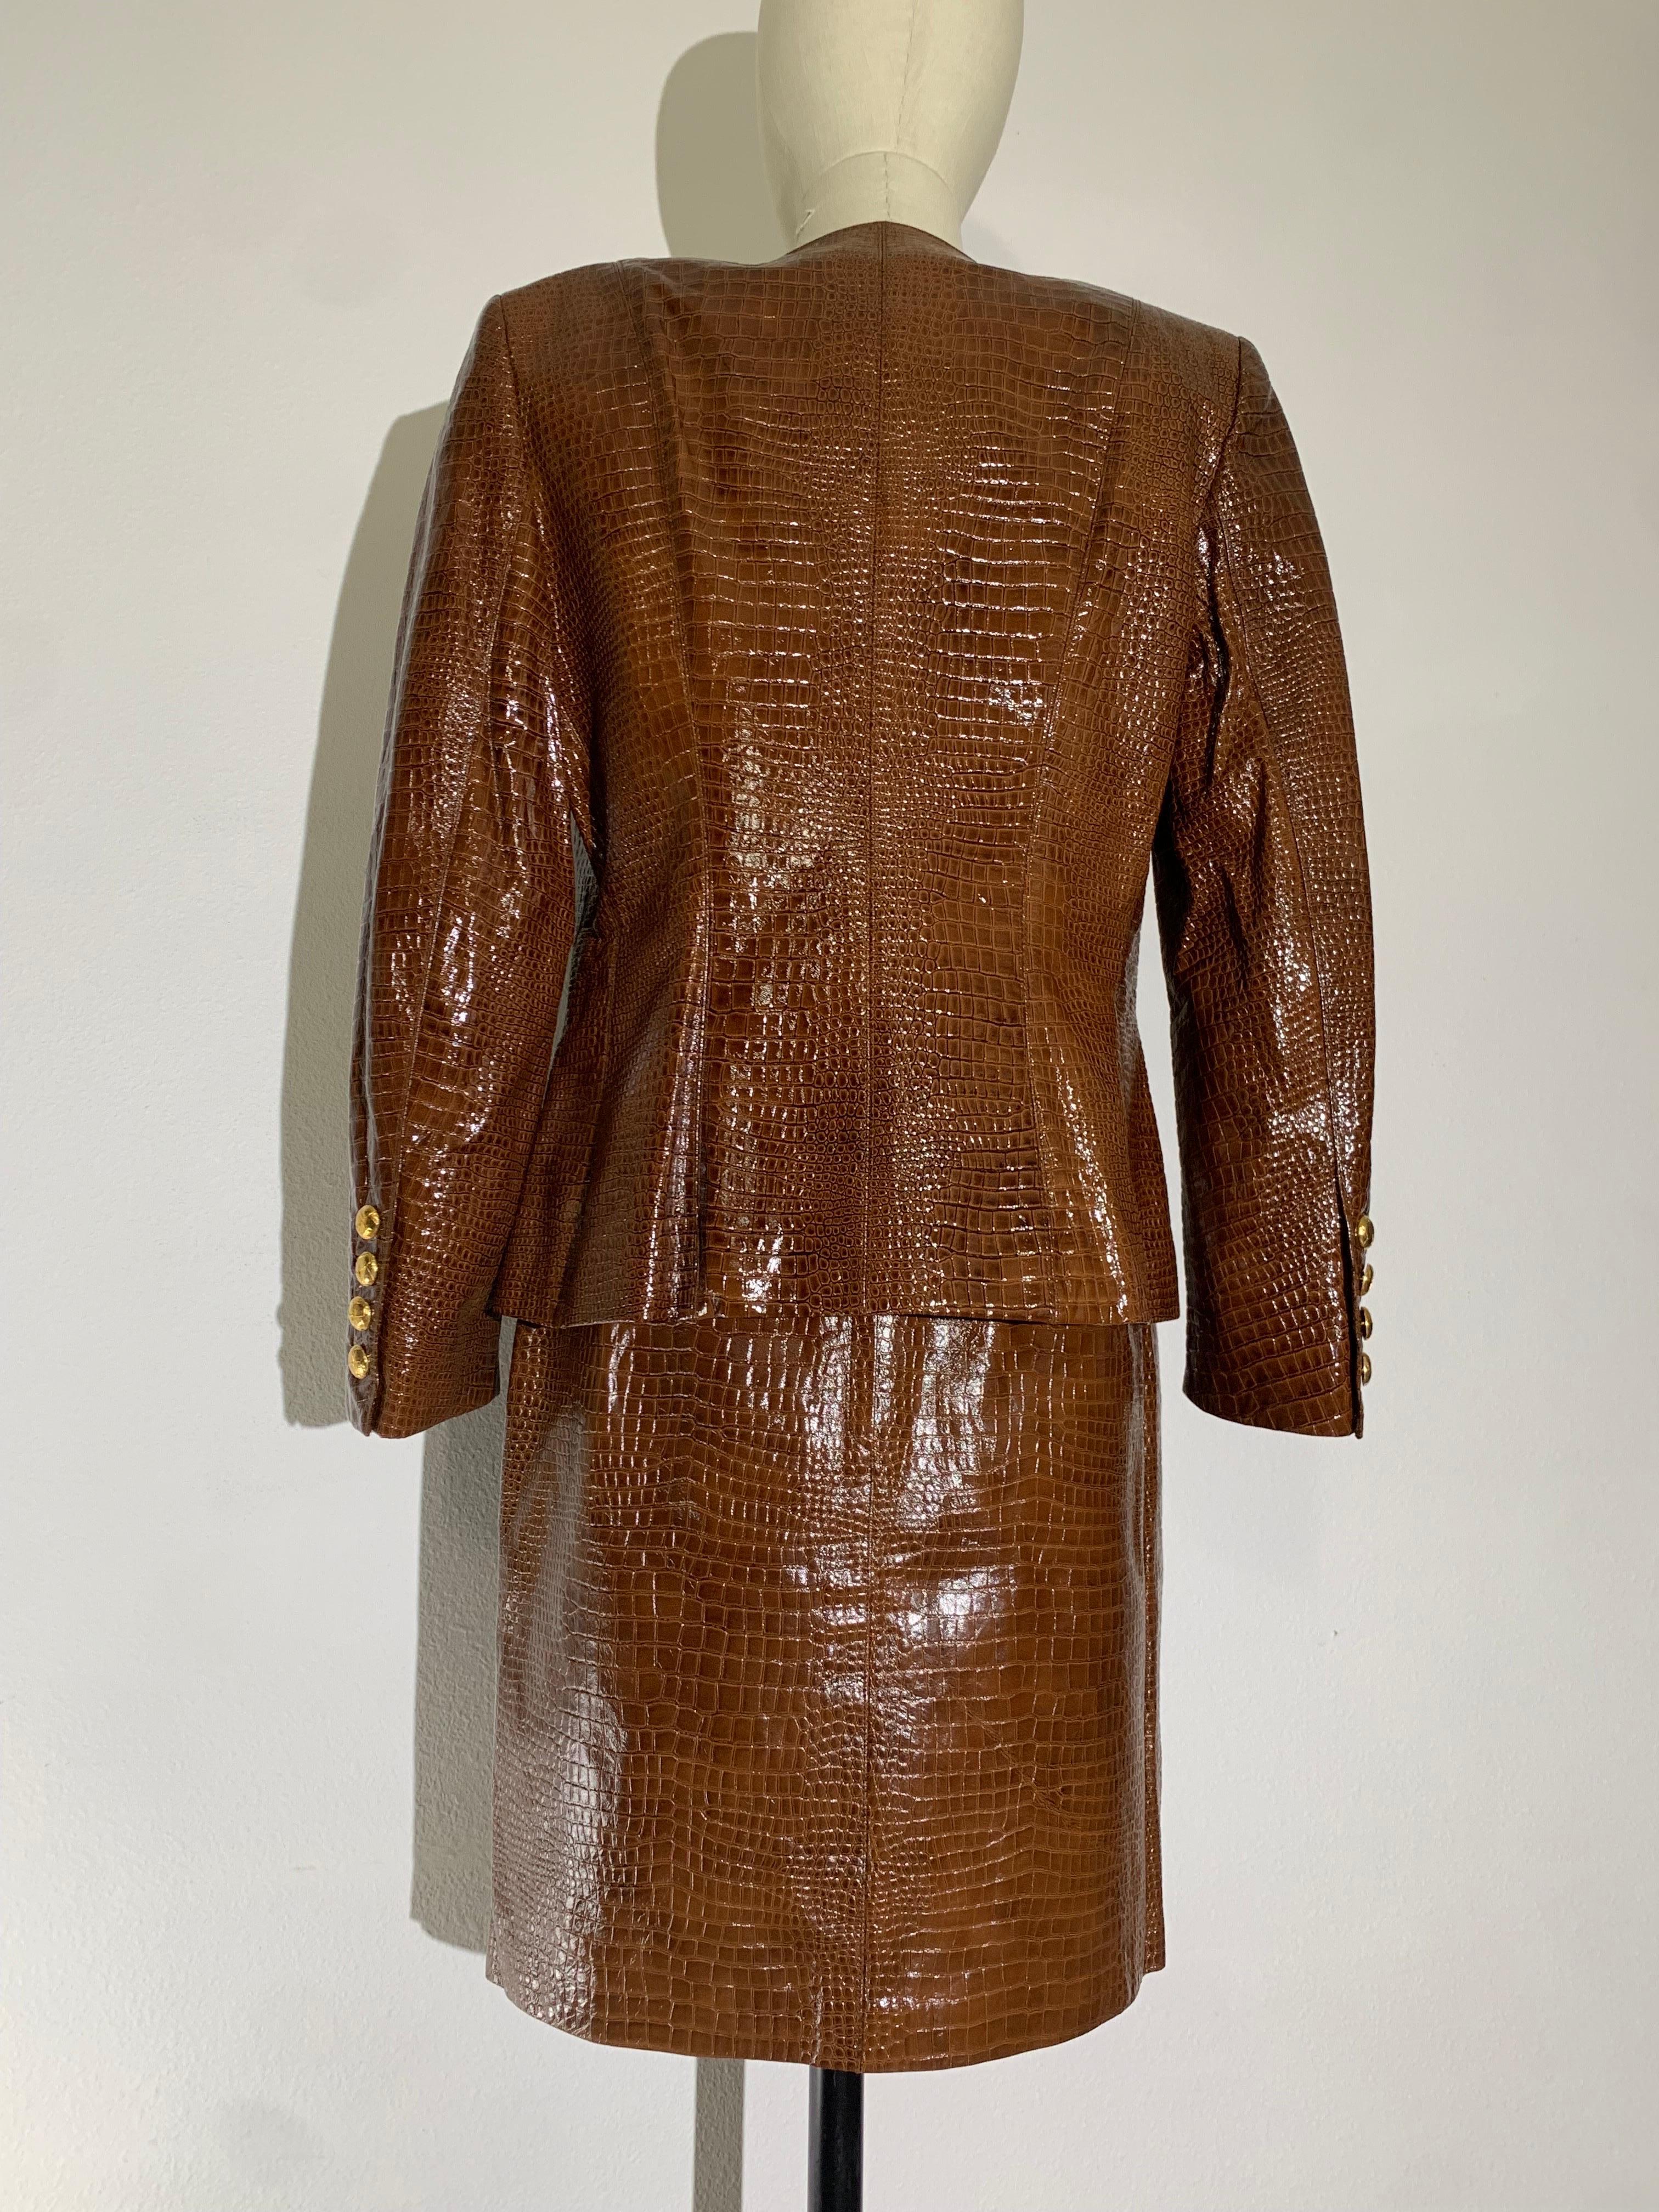 1980s Escada Brown Patent Leather Crocodile Embossed Skirt w Gold Buttons en vente 1